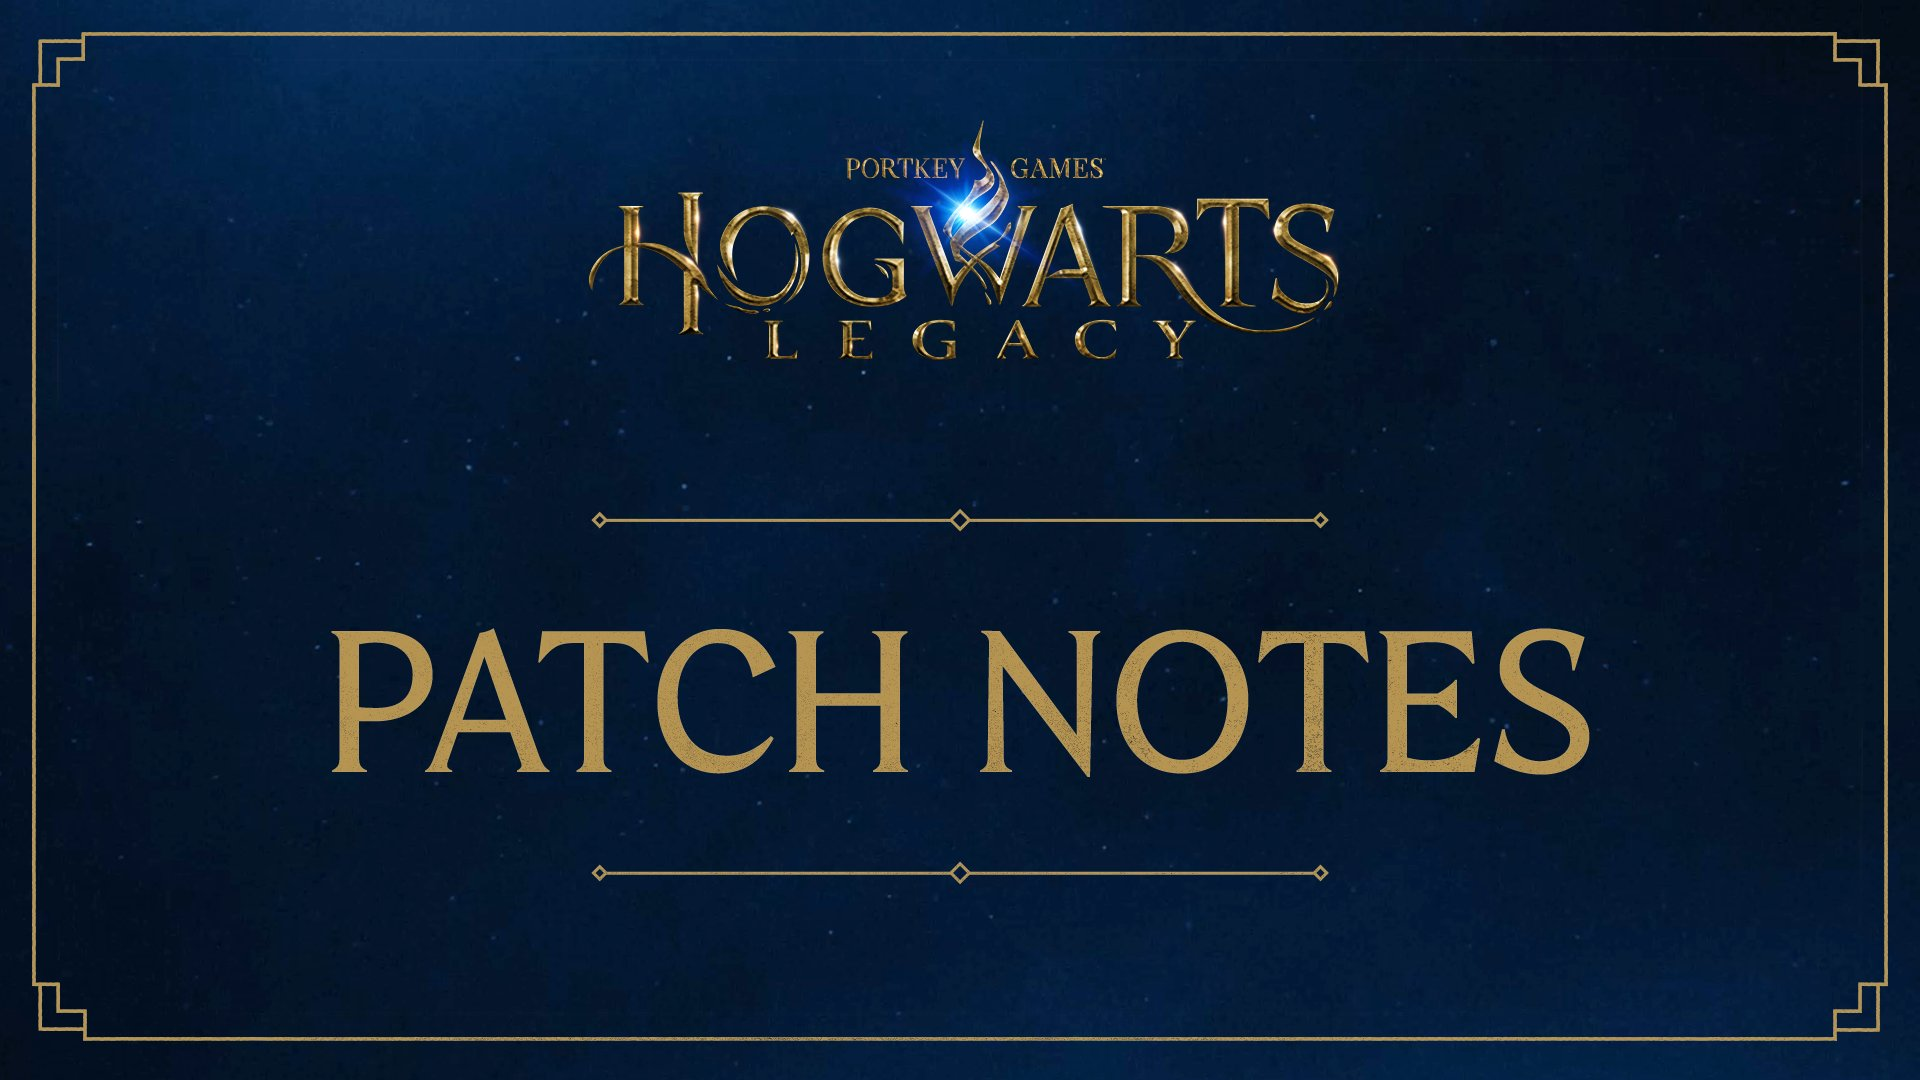 hogwarts legacy patch notes featured image